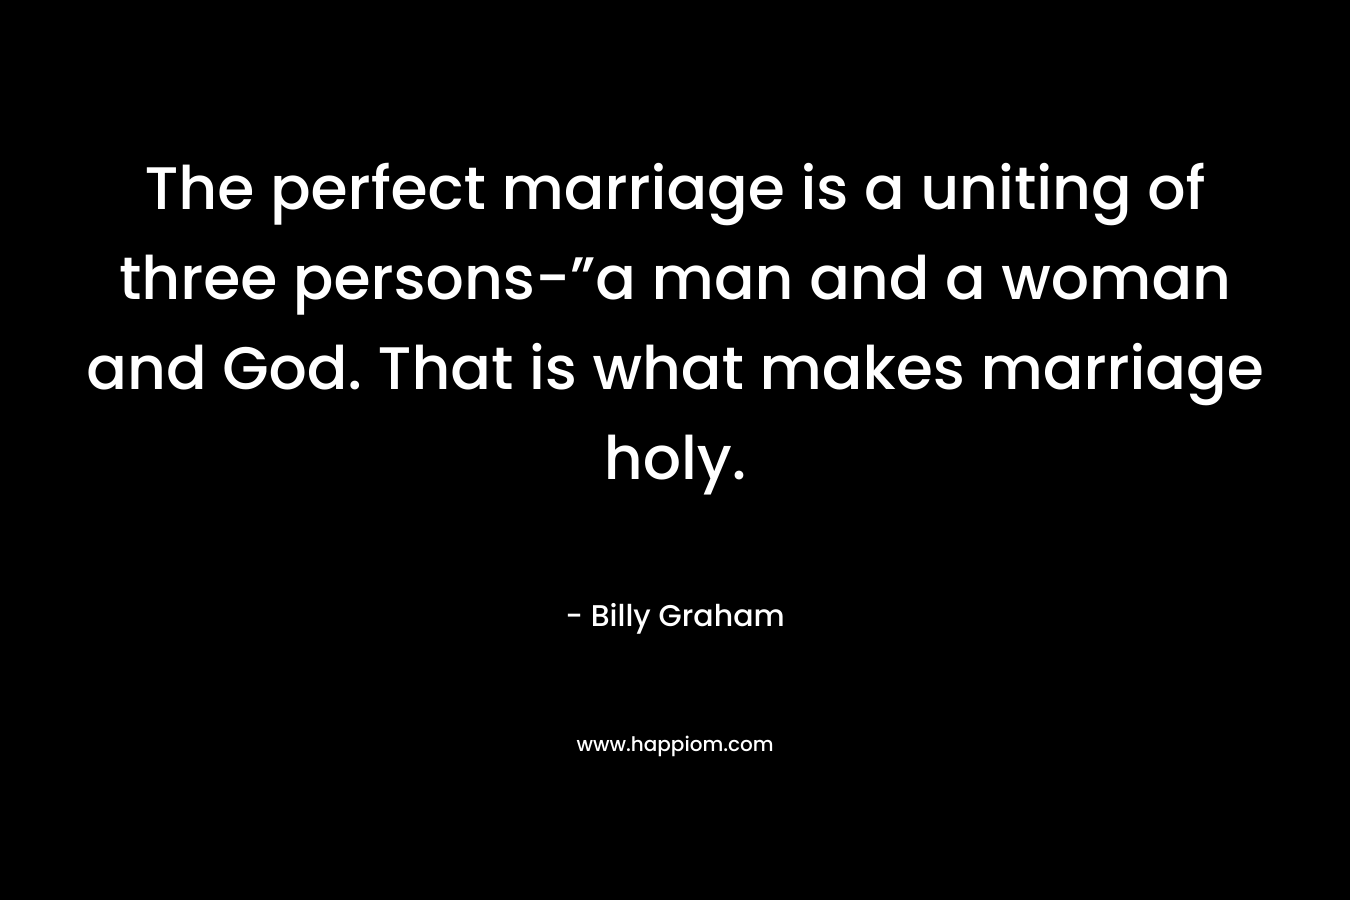 The perfect marriage is a uniting of three persons-”a man and a woman and God. That is what makes marriage holy.